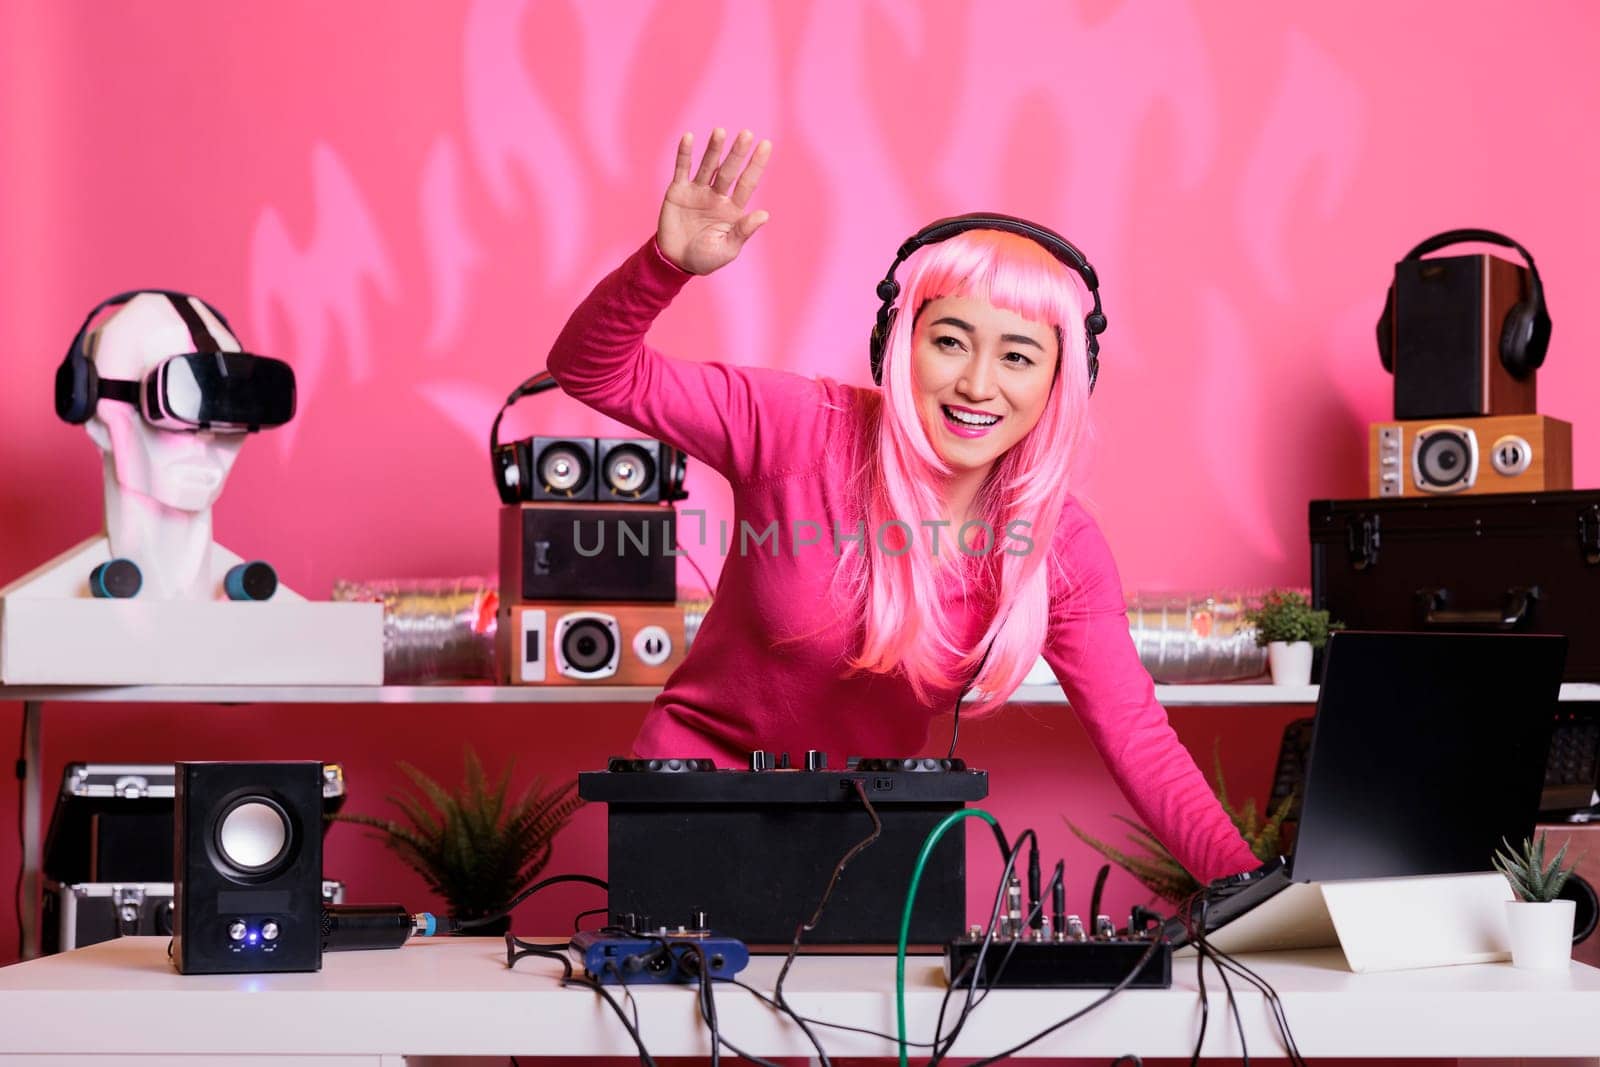 Artist with pink hair and blouse having fun while mixing eletronic music with techno using mixer console, standing at dj table in club at night. Musical performer enjoying performing